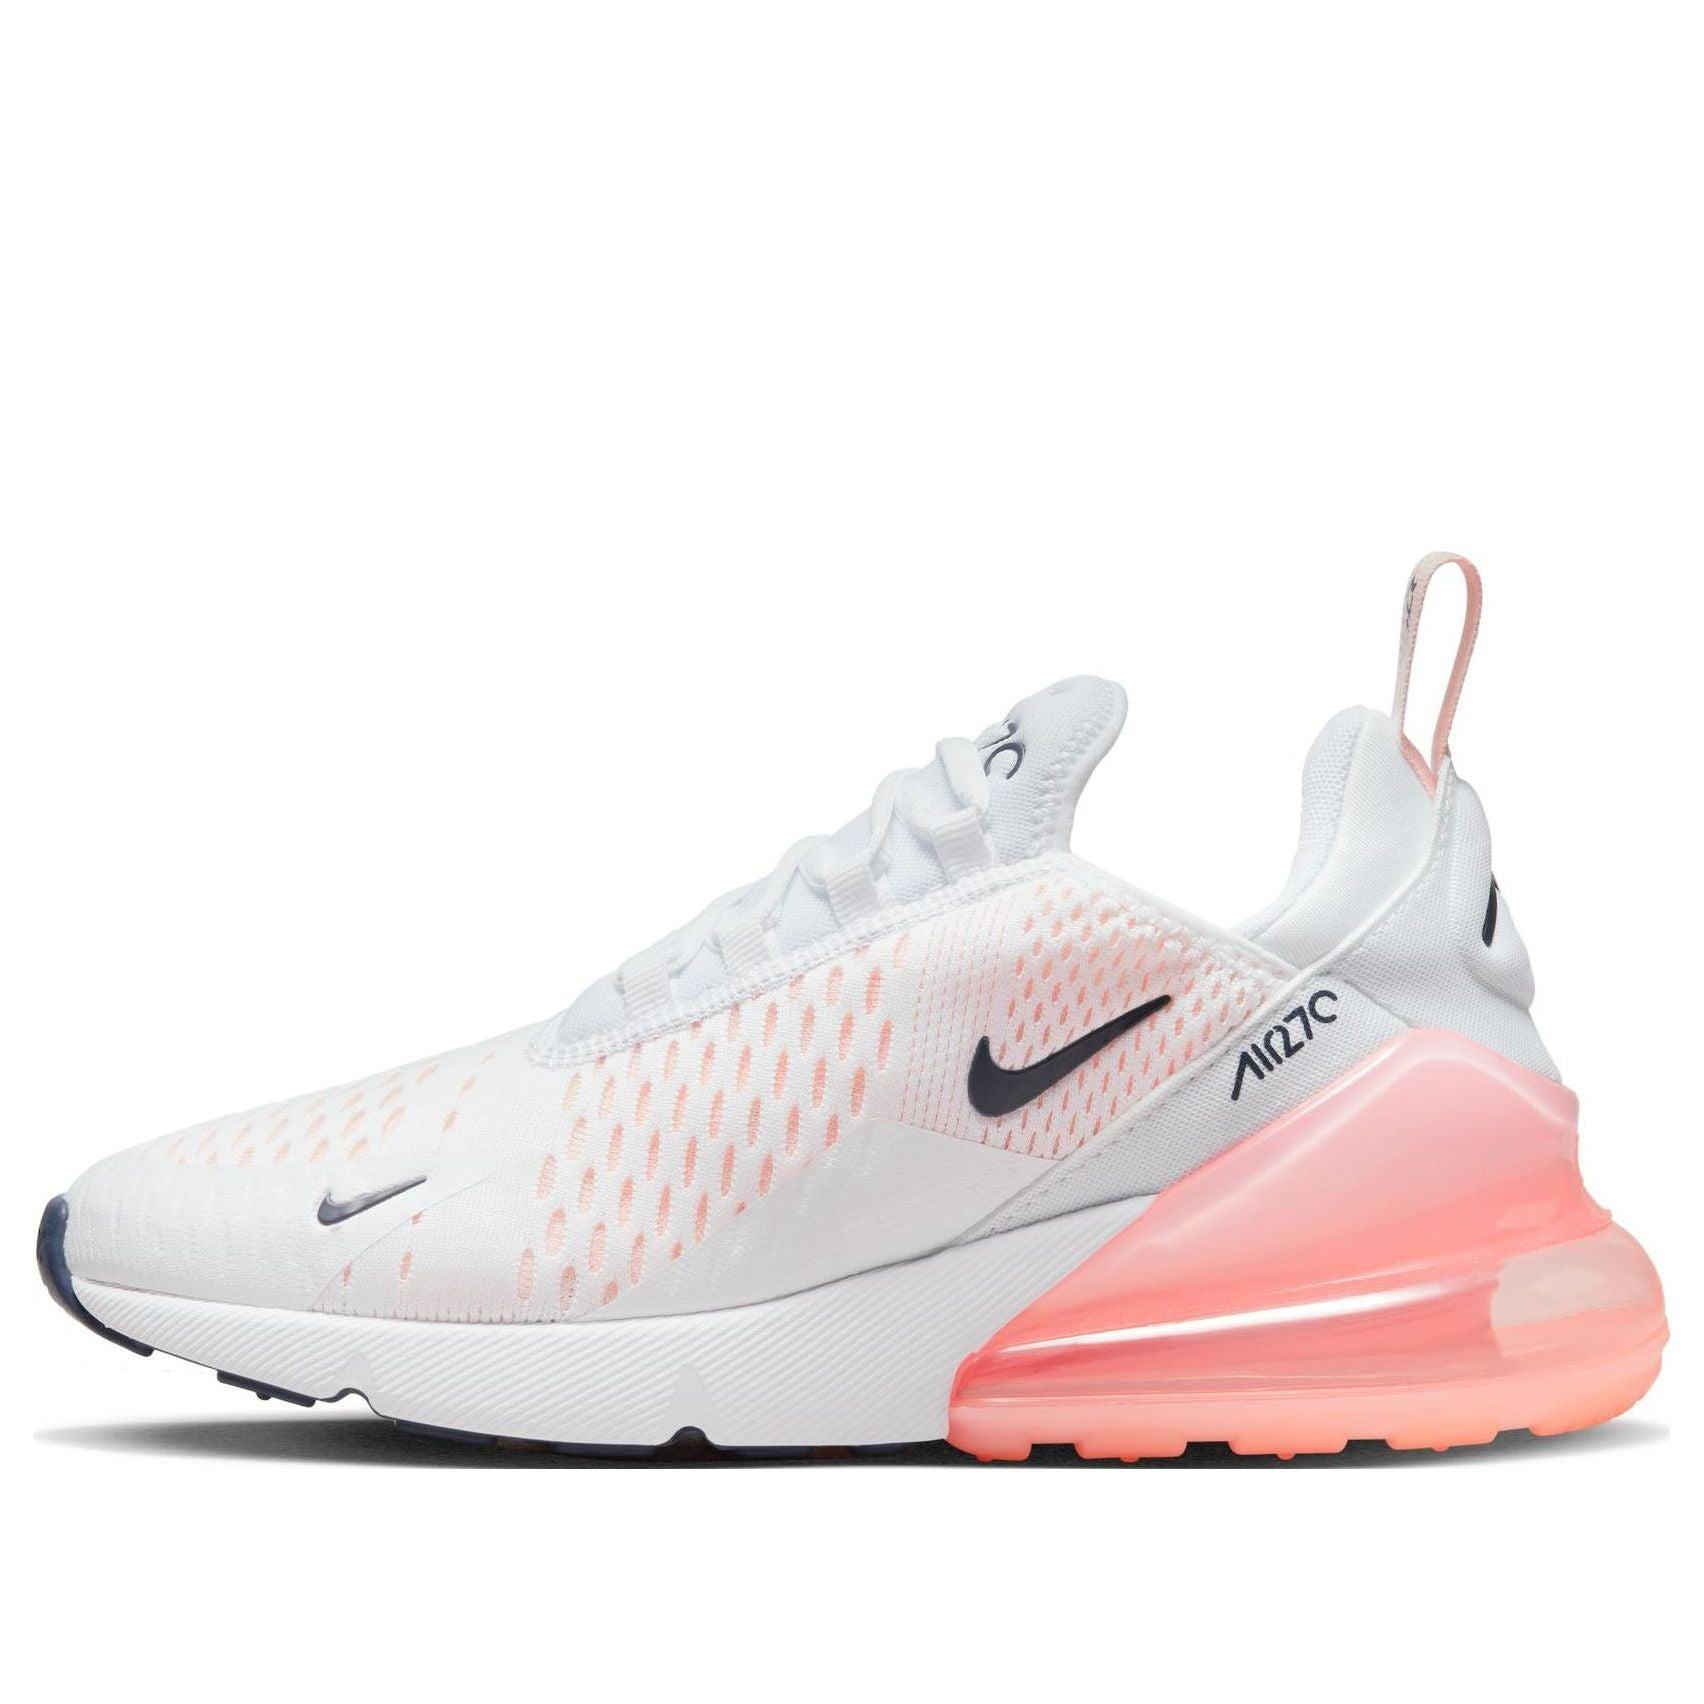 Nike Air Max 270 in Pink | Lyst